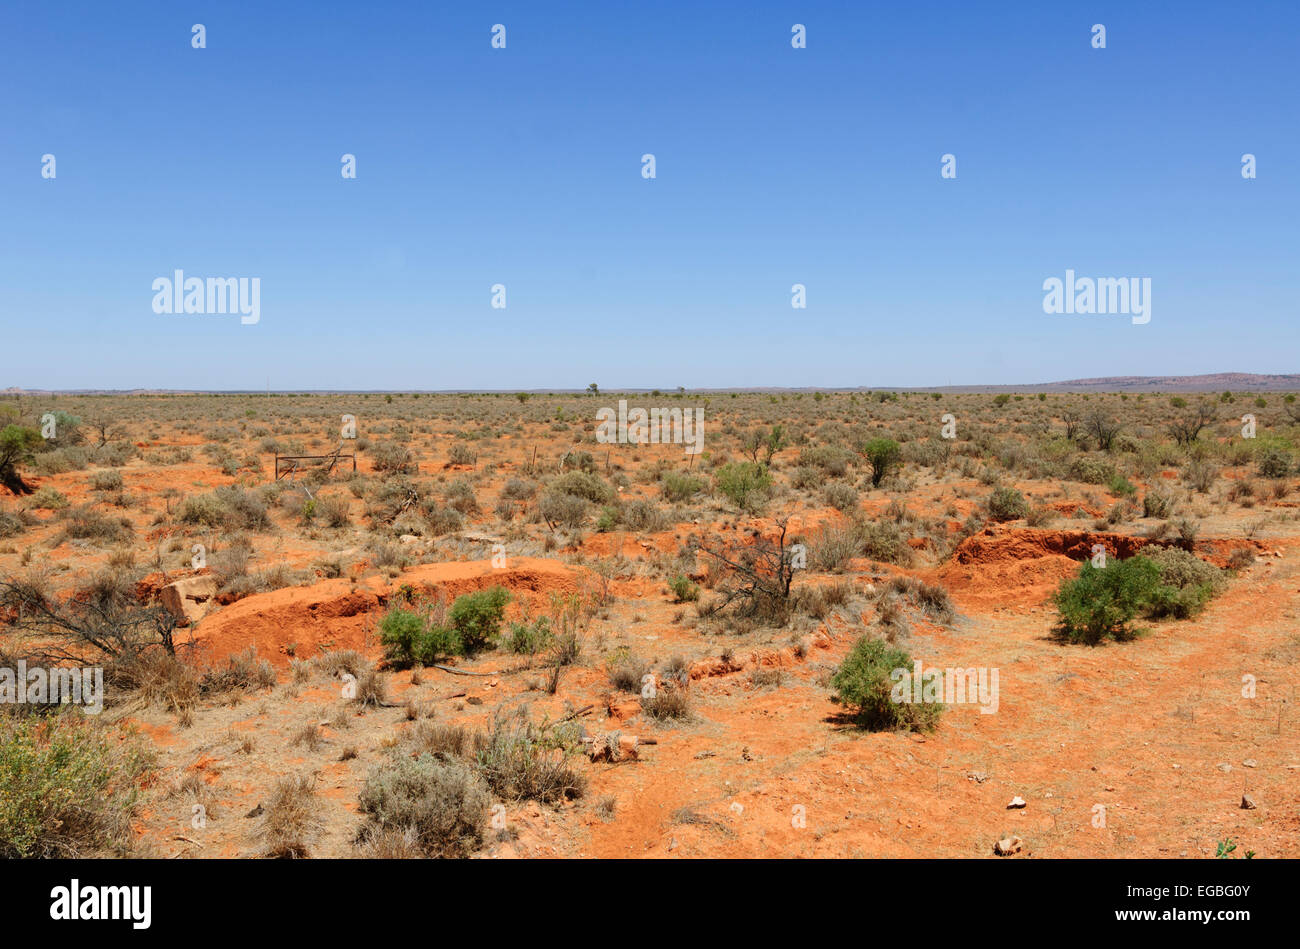 View of the Red Centre in the Outback, near Wilcannia, New South Wales, NSW, Australia Stock Photo